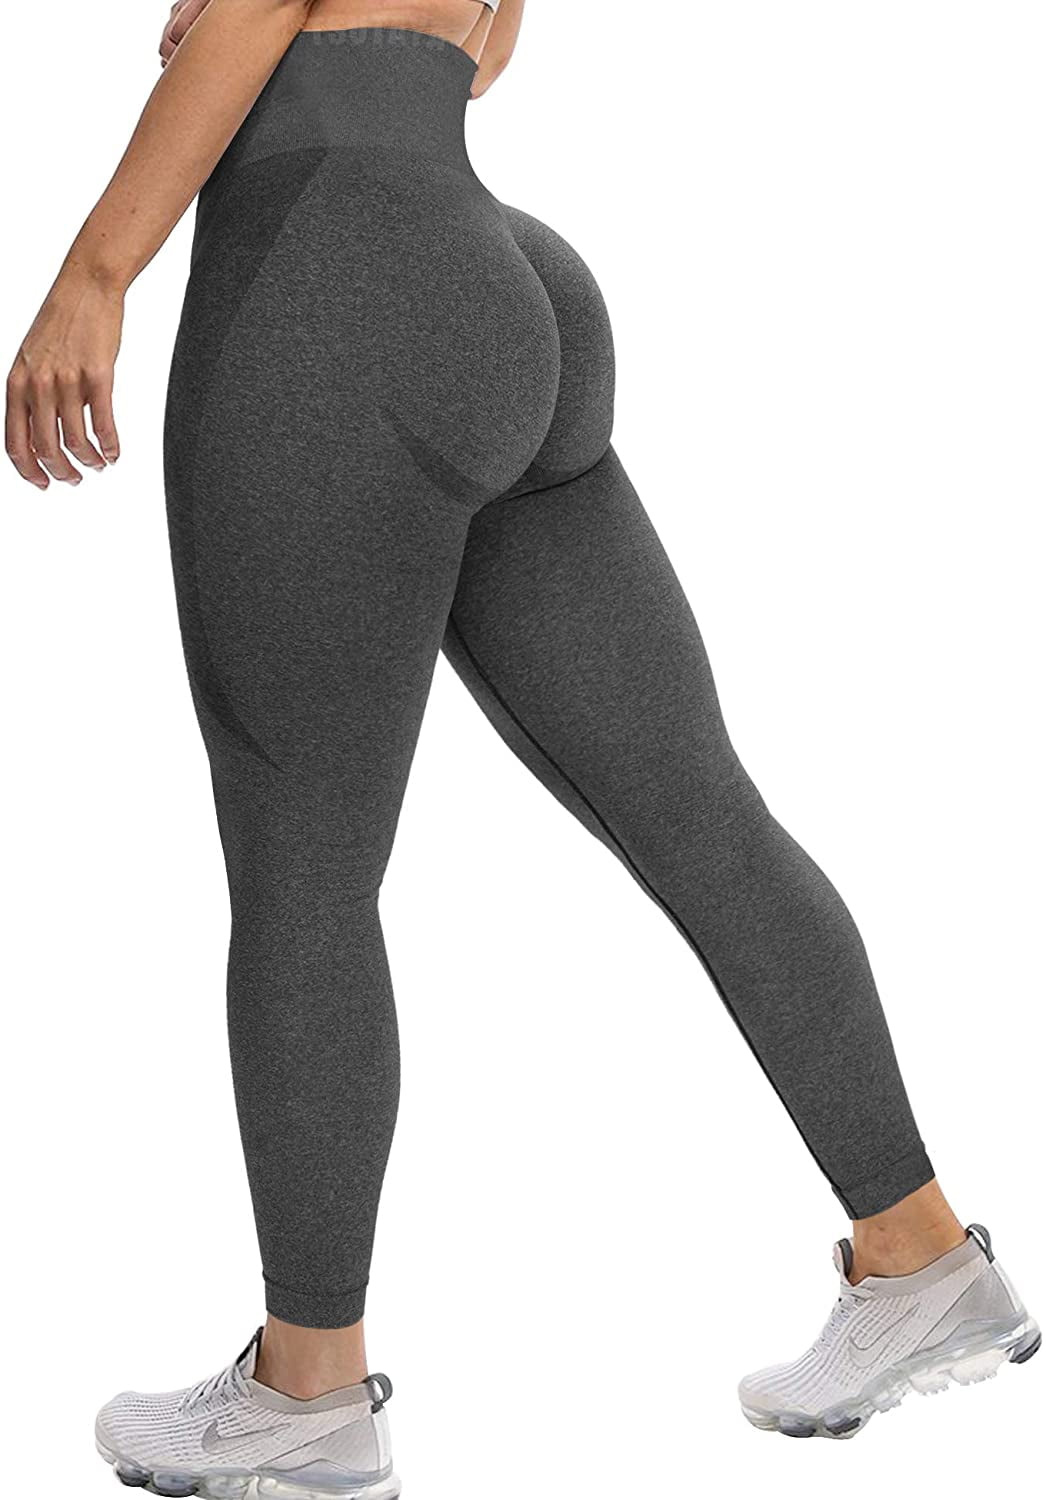 Oudisen Seamless Workout Leggings for Women High Waist Tummy Control Yoga Pants Butt Lift Compression Tights 